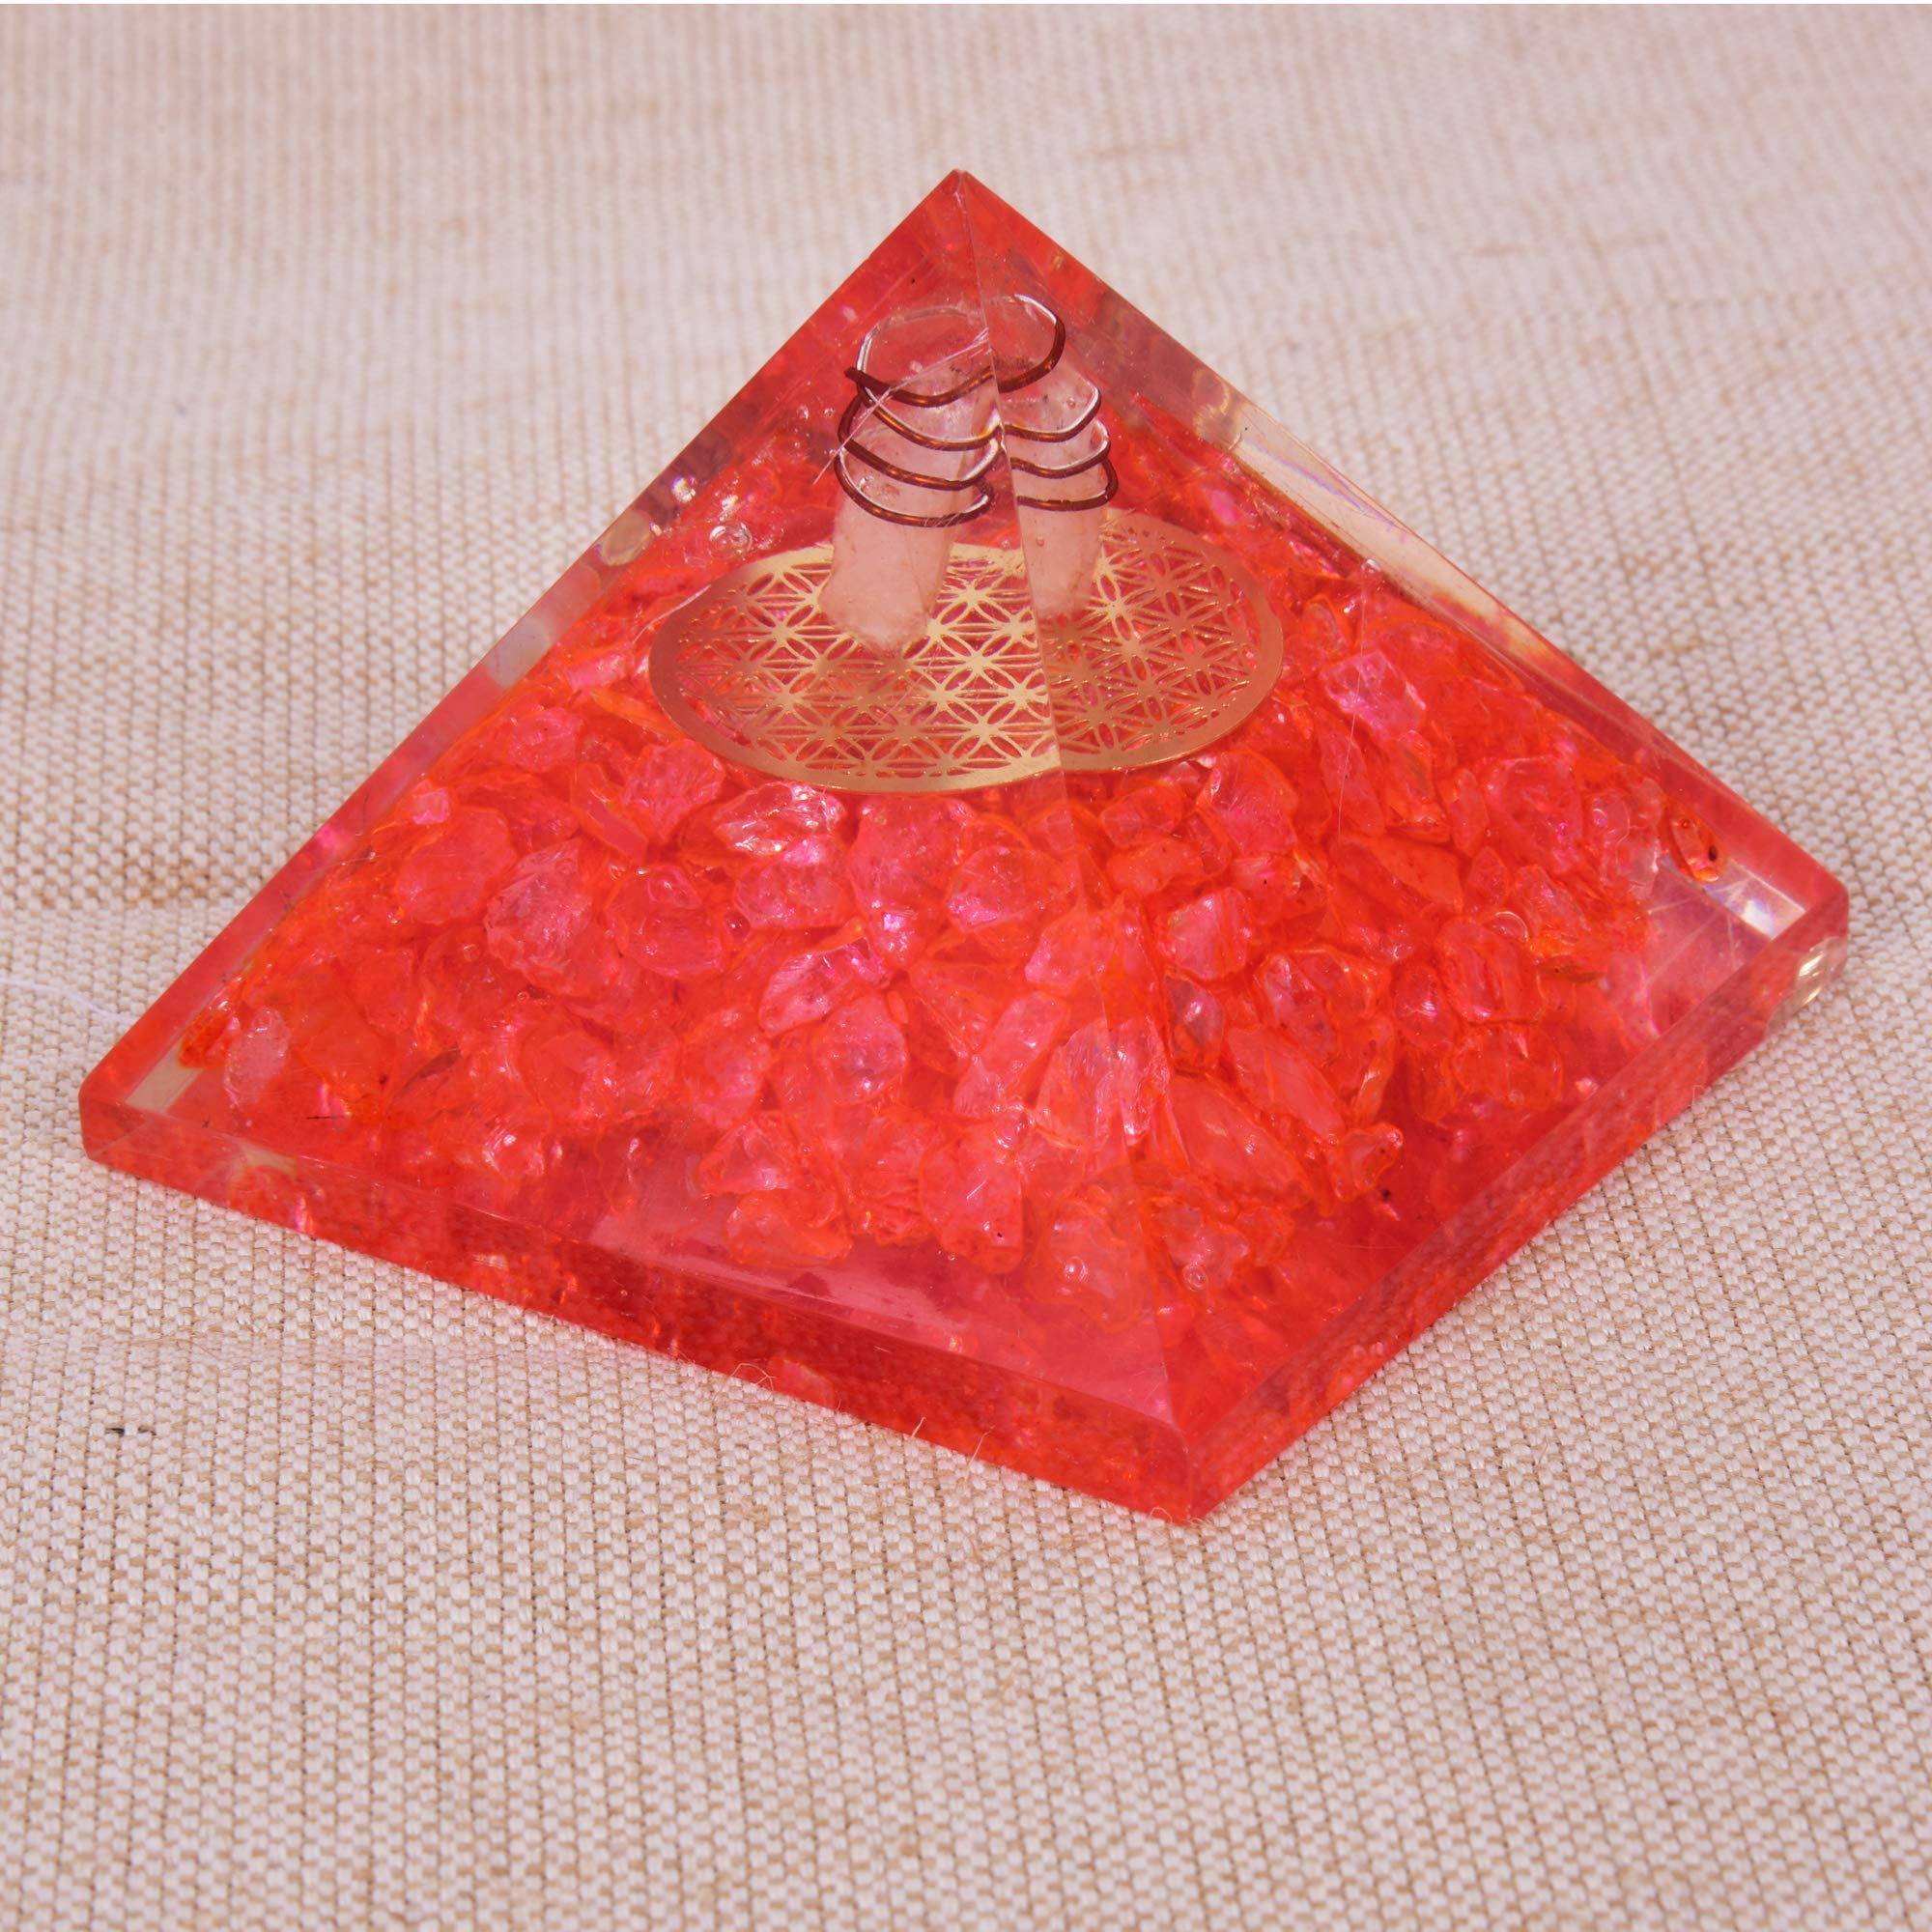 Natural Crystal Red Onyx Orgone Pyramid Energy Generator With EMF Protection for Healing Meditation Balancing Positive Energy Flower of Life